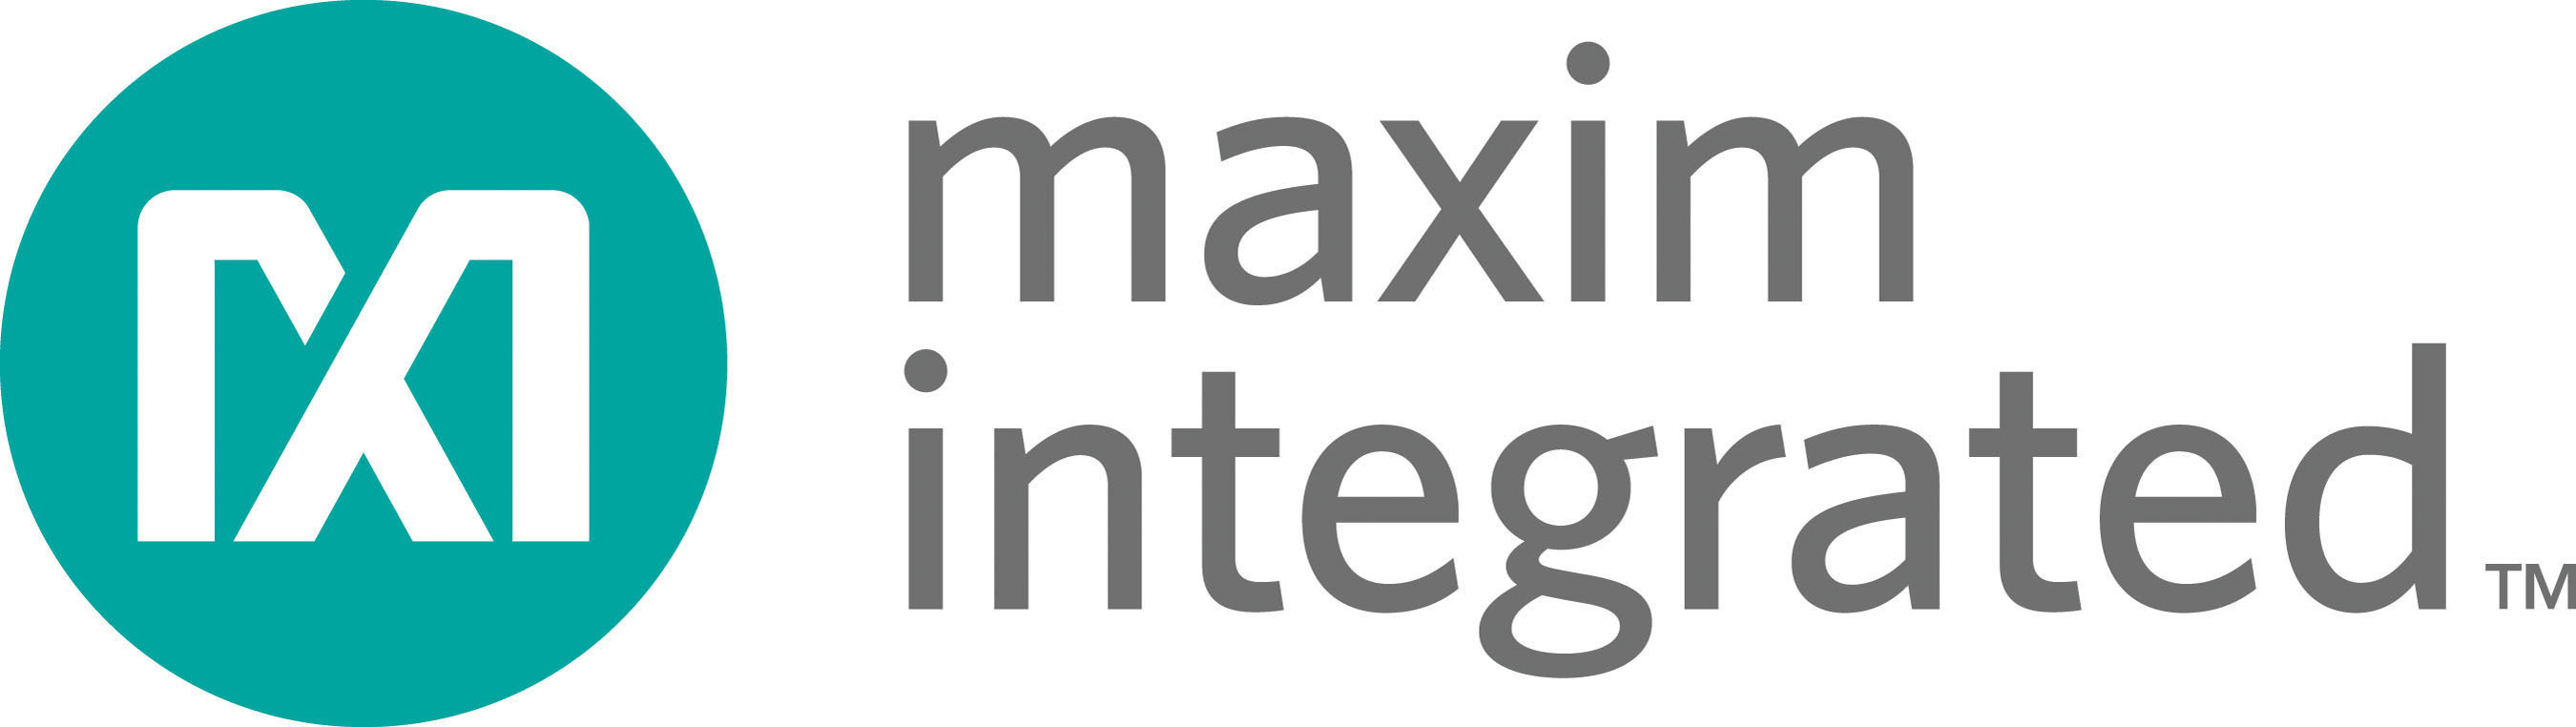 Logo for Maxim Integrated Products Inc. (PRNewsFoto/Maxim Integrated Products, Inc.) (PRNewsFoto/)